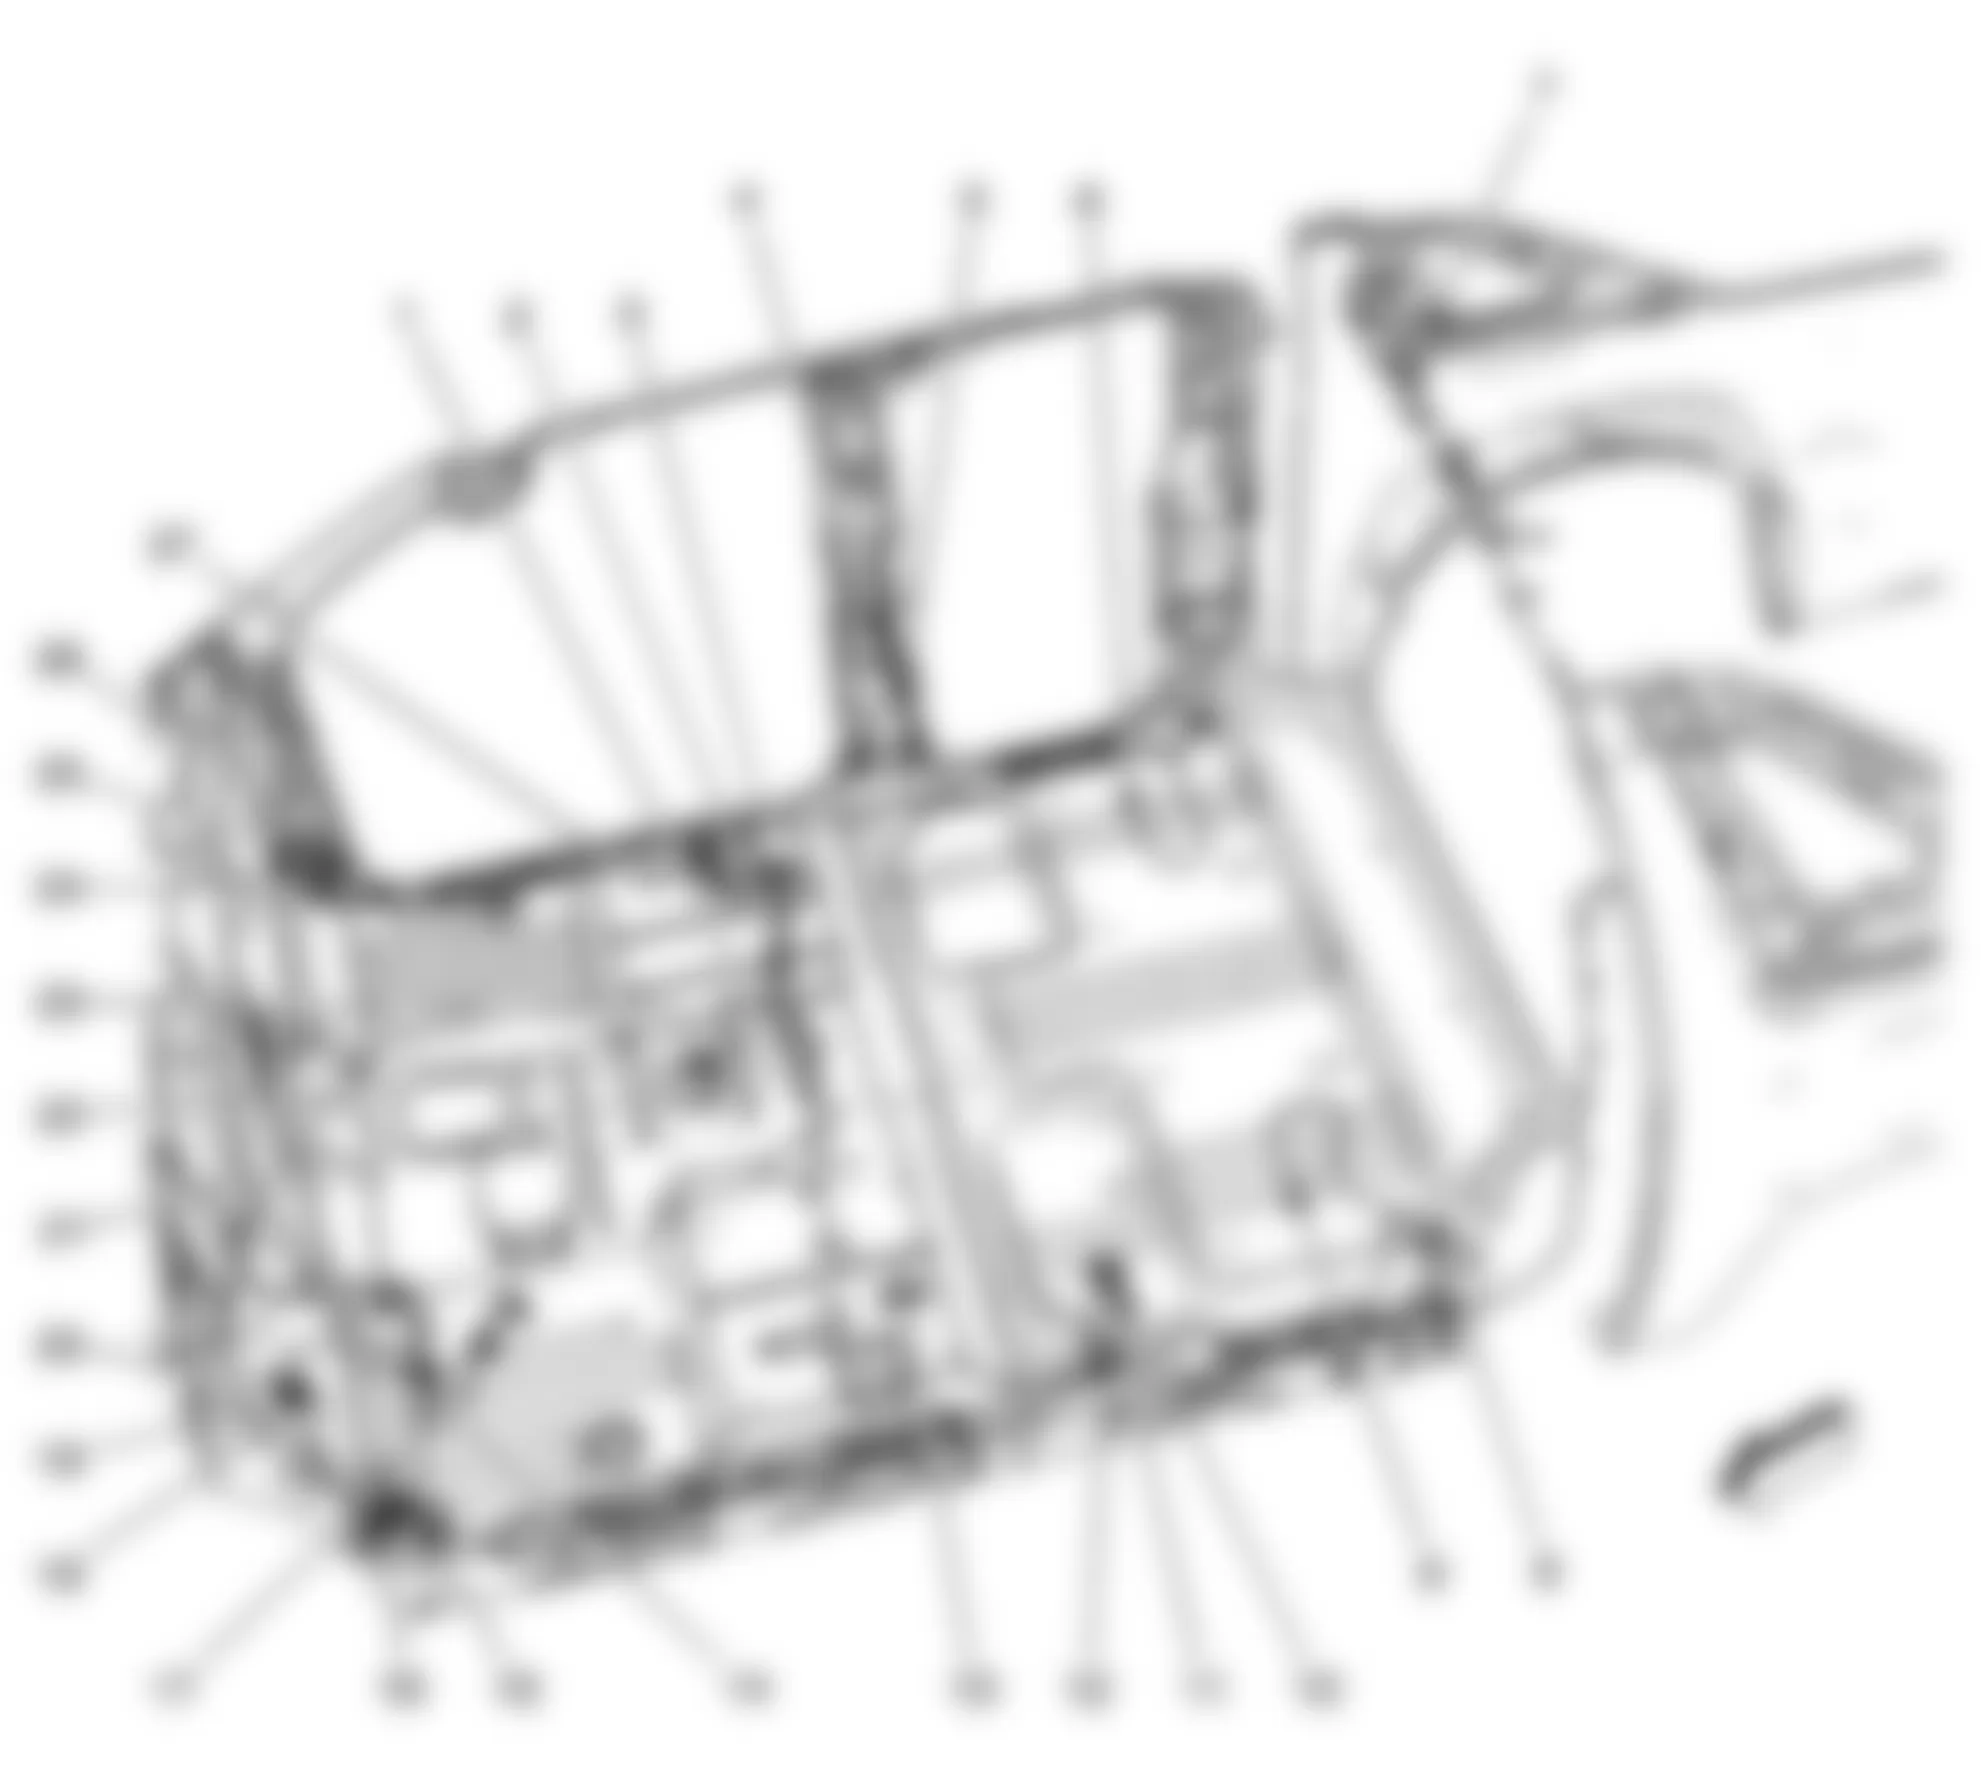 GMC Yukon Hybrid 2009 - Component Locations -  Passenger Compartment (Except One Piece Liftgate)